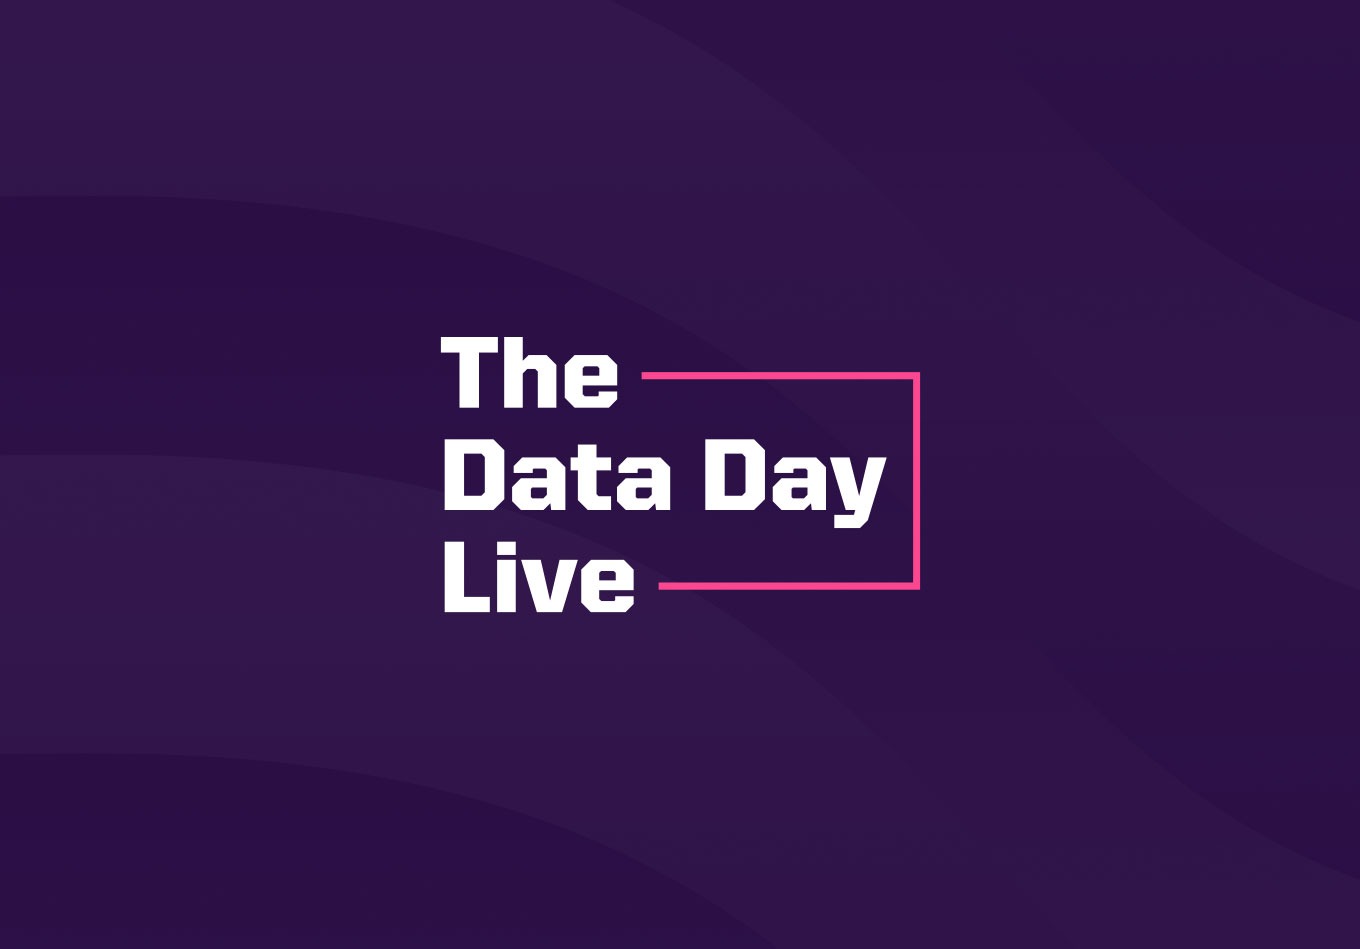 Liverpool and Manchester City Serve Up Premier League Classic | The Data Day Live – 17 October